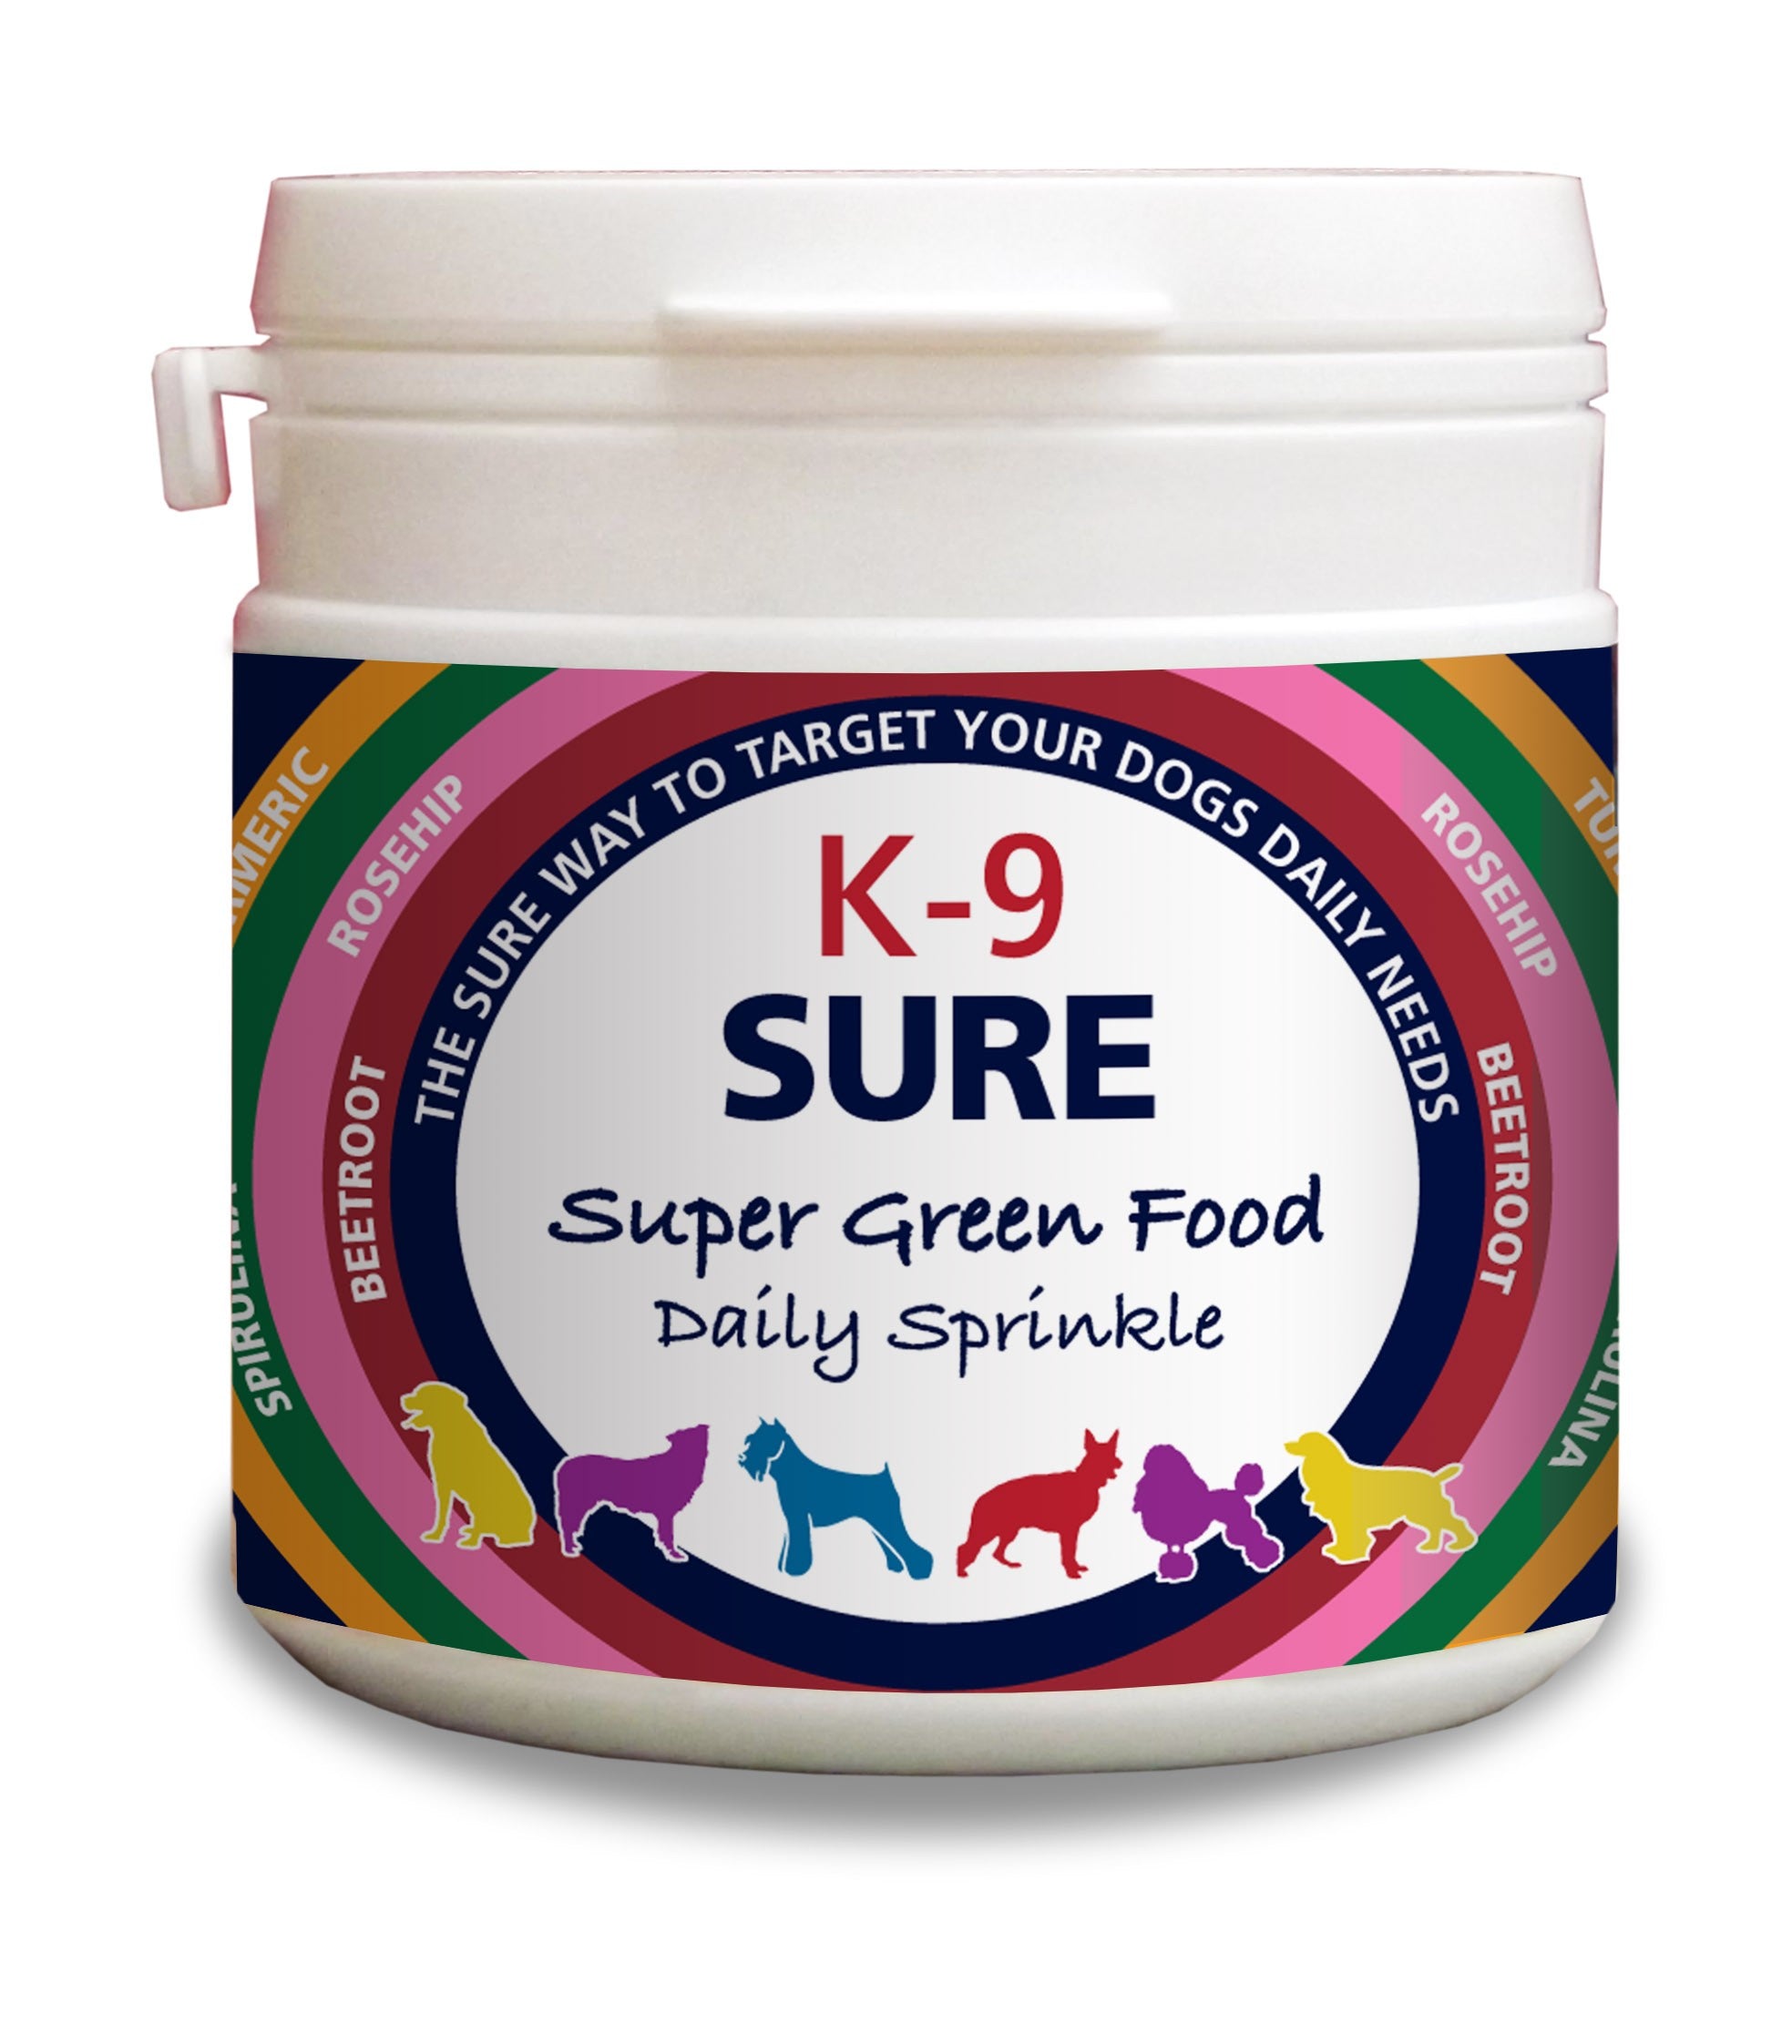 Phytopet K-9 Sure Super Green Food Nutritional Supplement Optimum Health and Wellbeing Daily Sprinkle Supplement